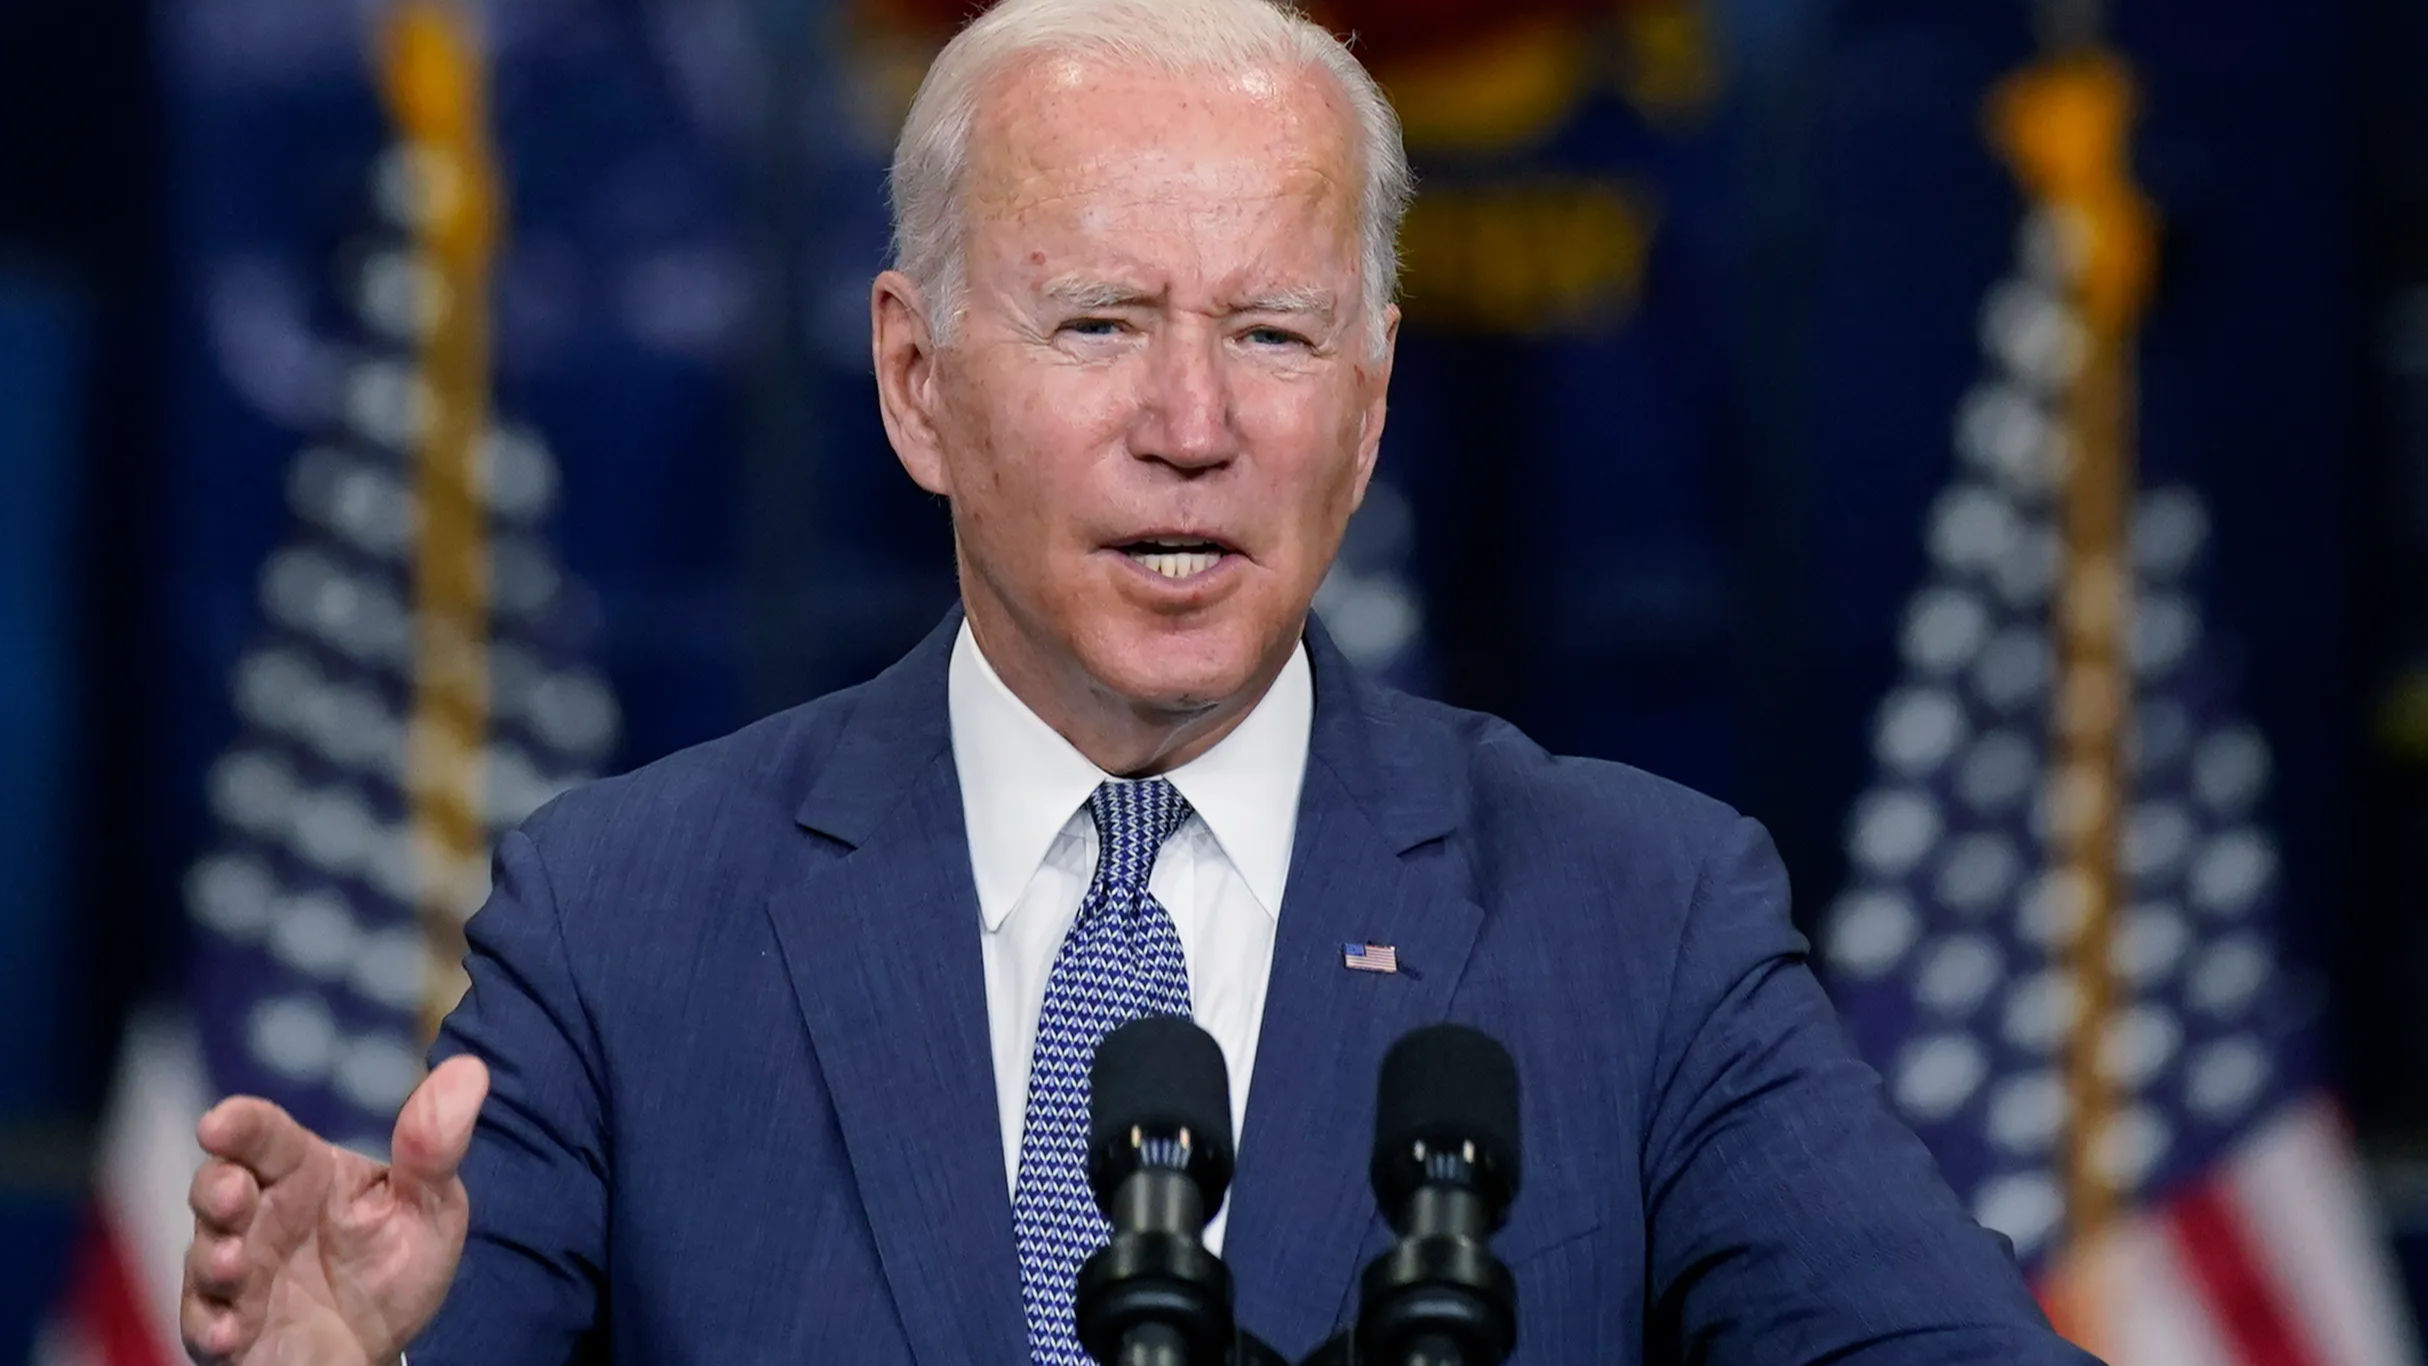 At inflection point: Biden calls for compromise on social spending plan